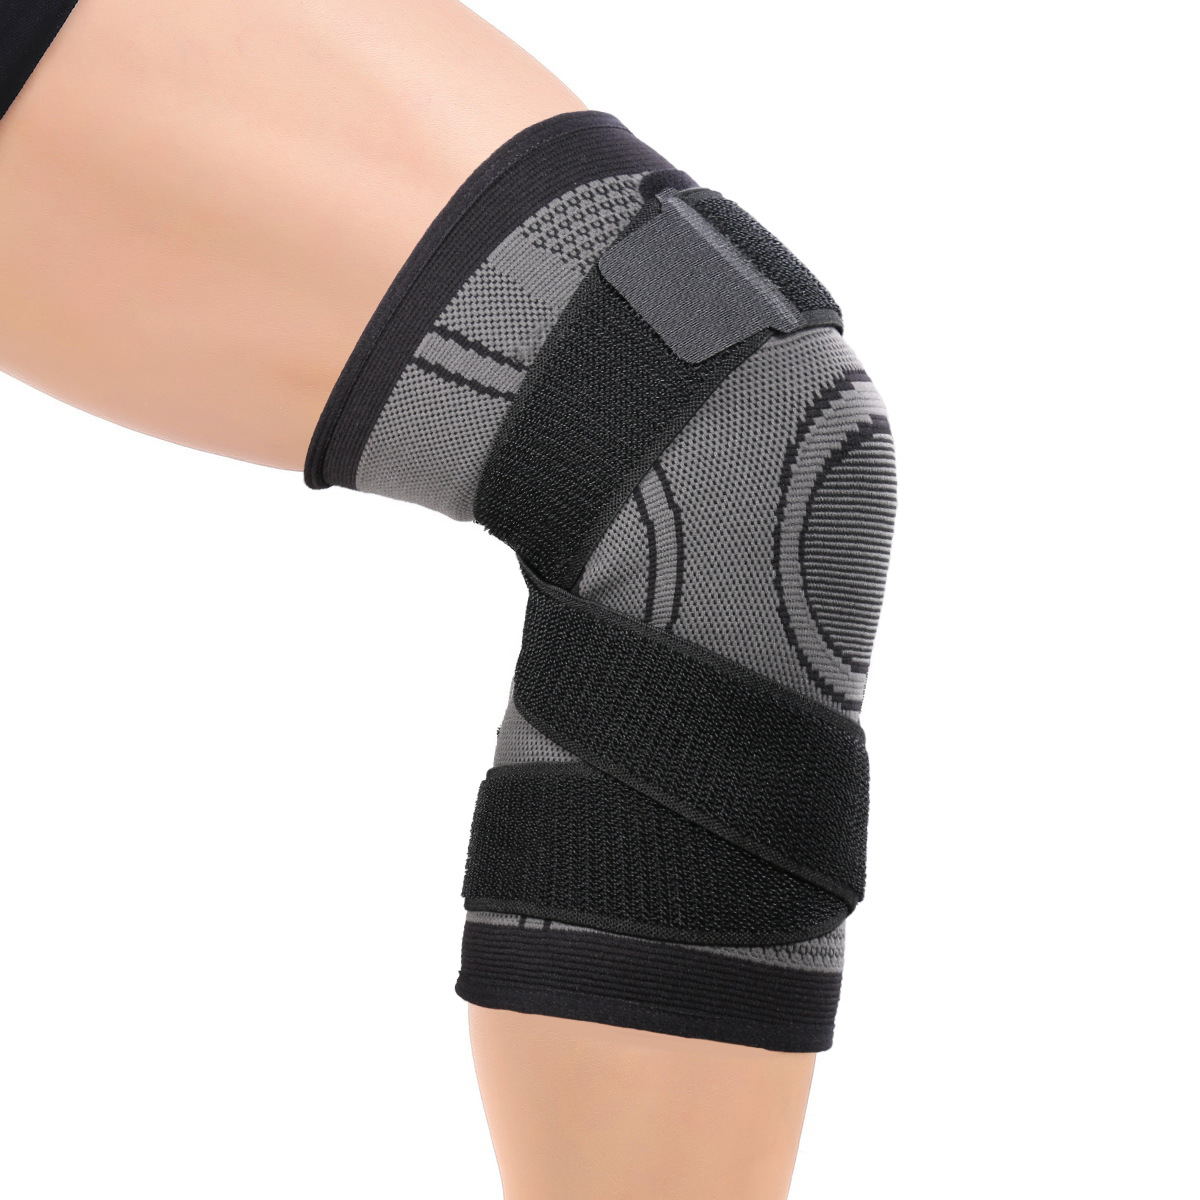 Knee Brace for Joint Pain and Arthritis Relief